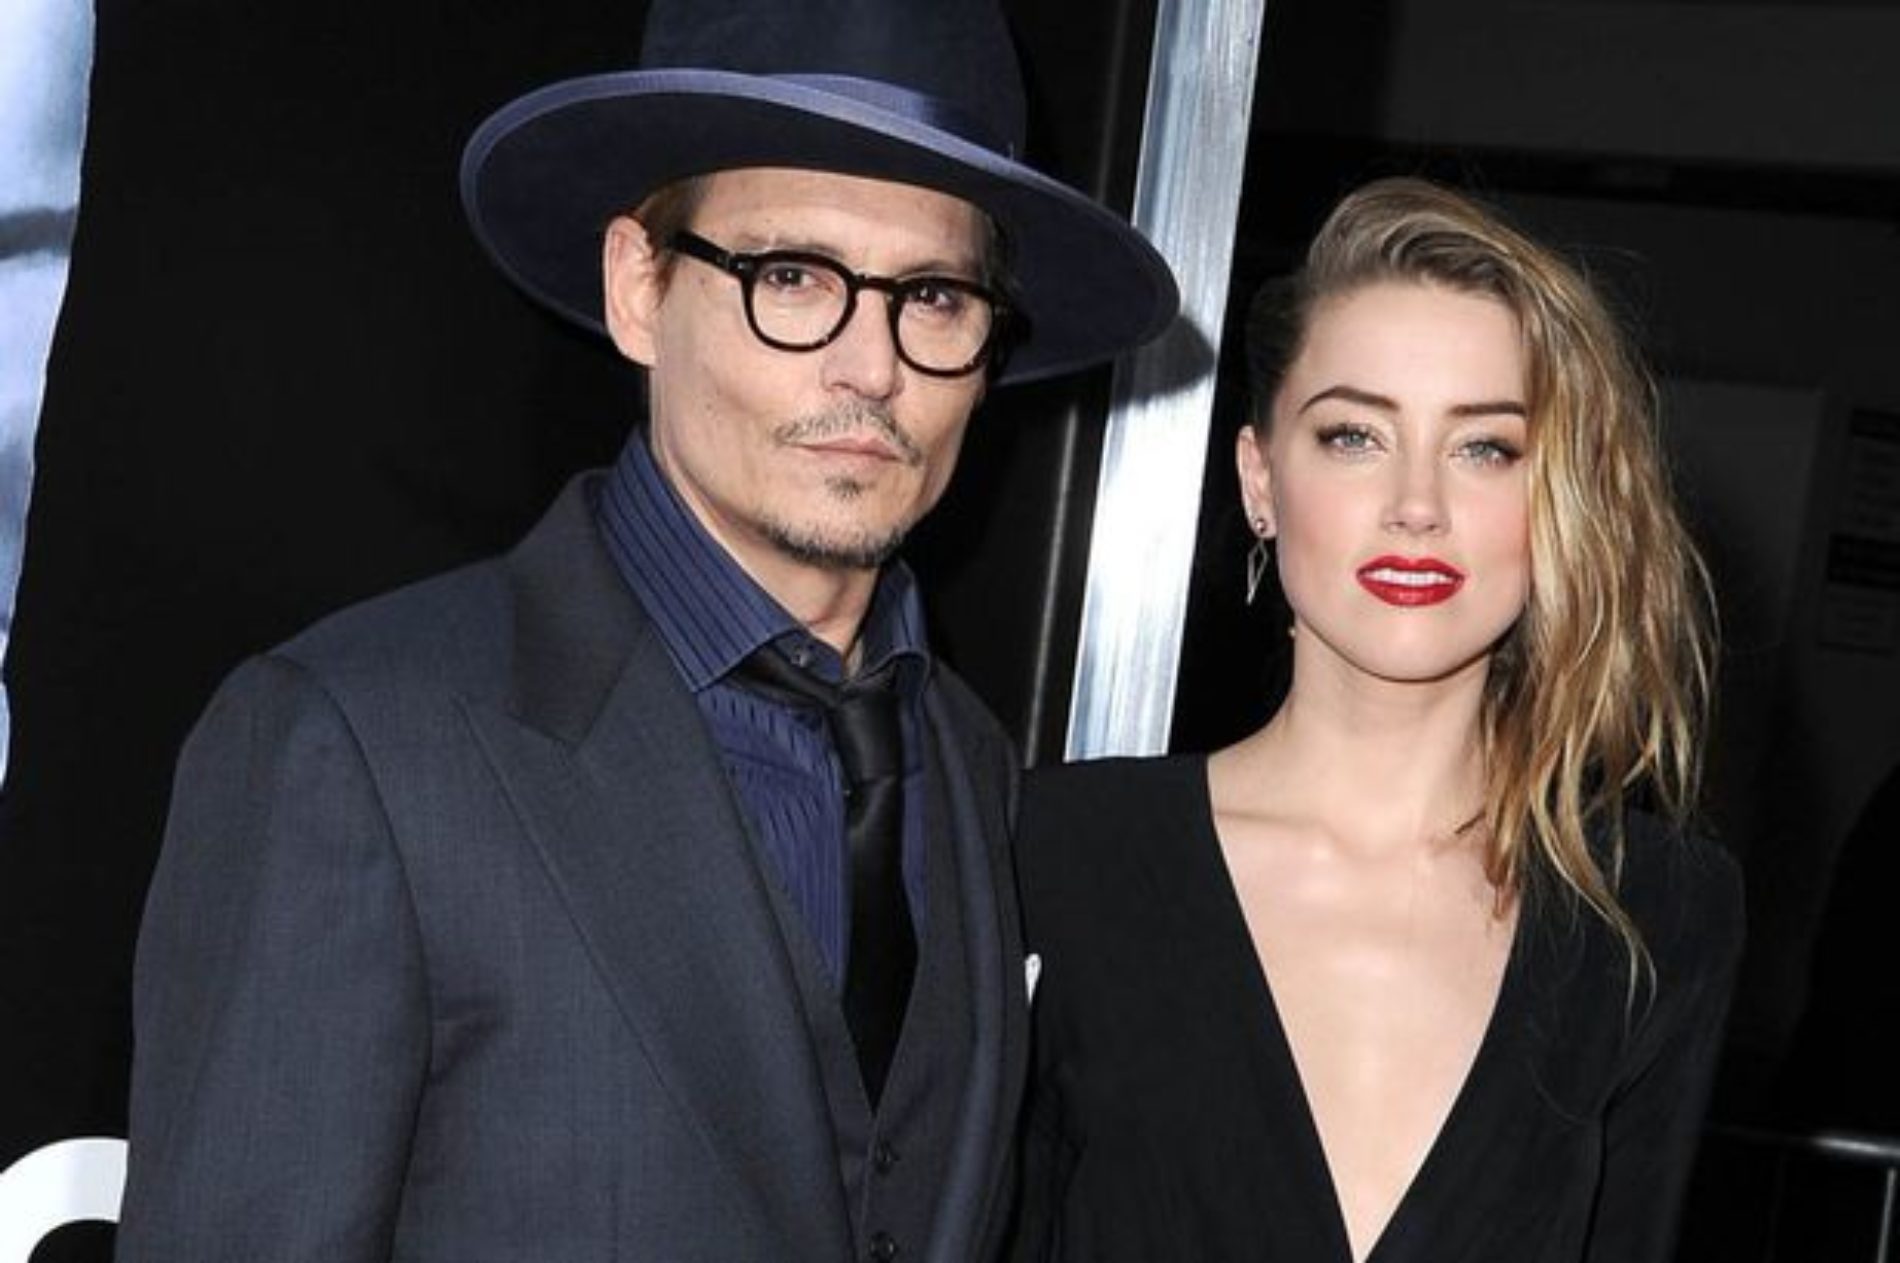 ‘Marrying Johnny Depp does not define my sexuality.’ Says Amber Heard